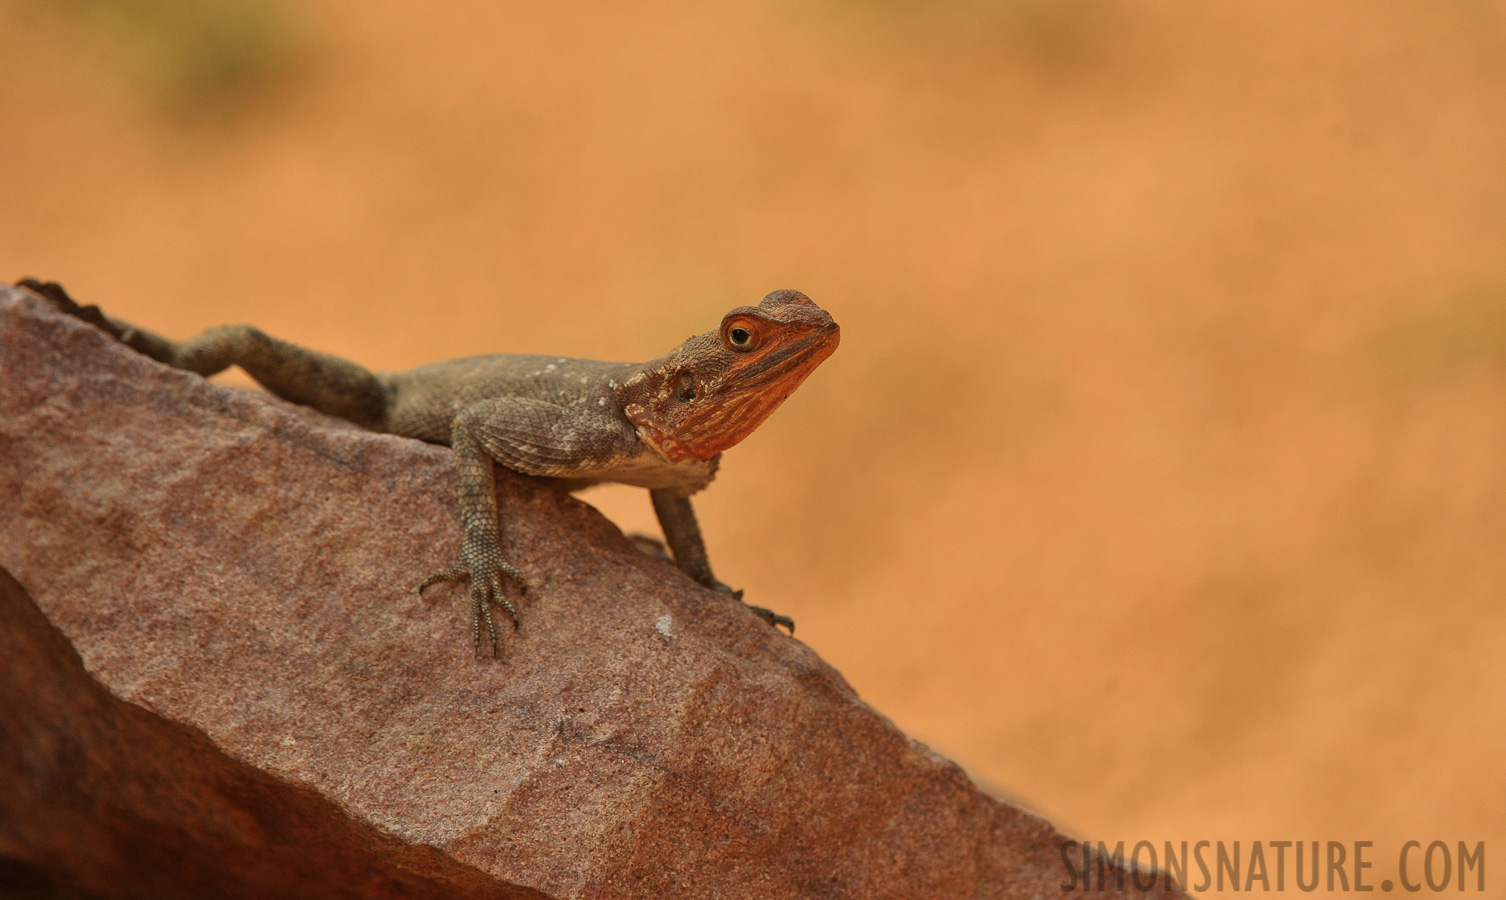 Agama planiceps [400 mm, 1/800 sec at f / 8.0, ISO 1000]